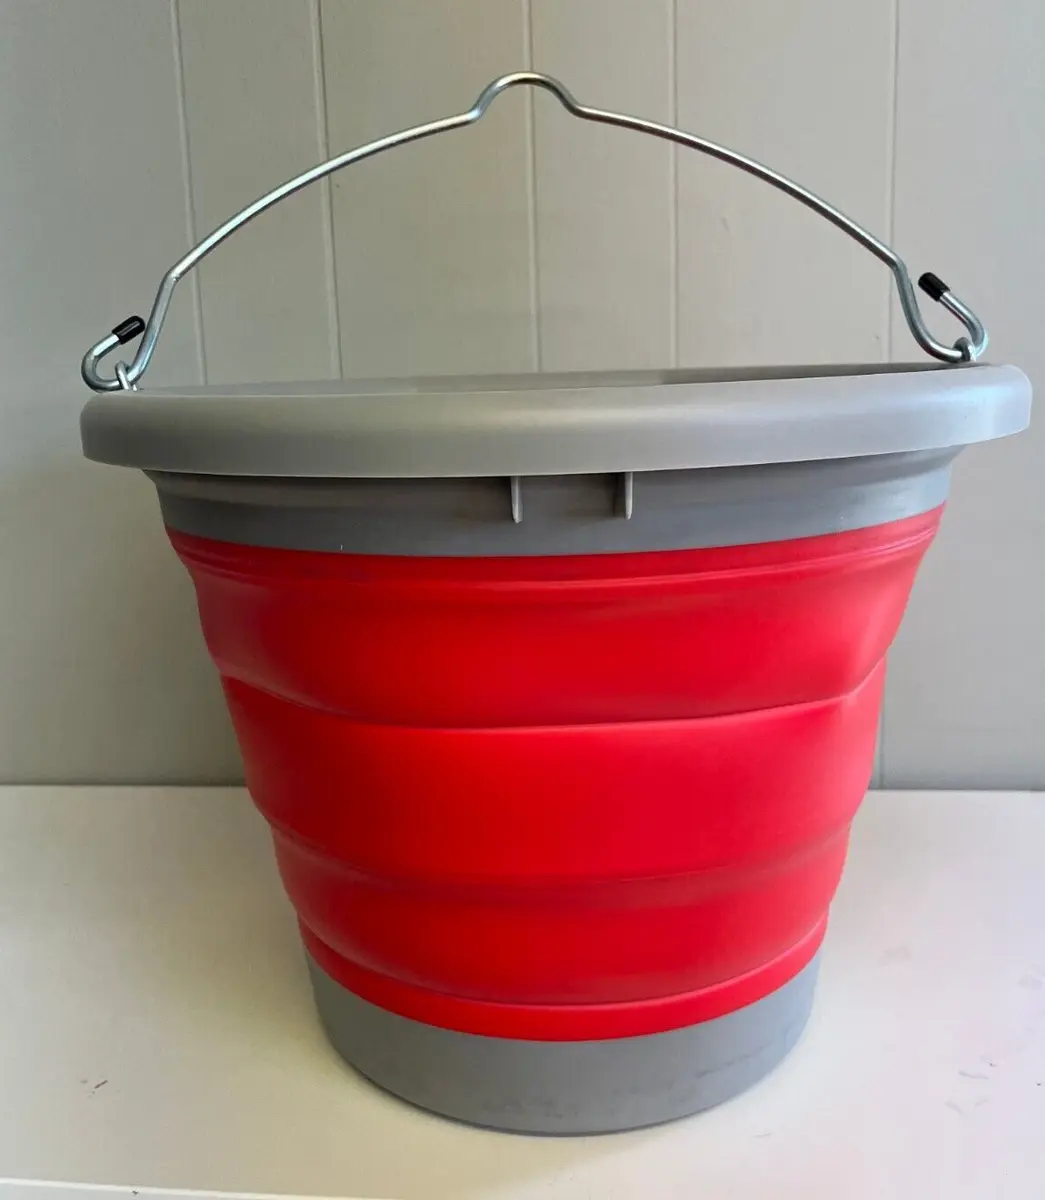 BOSS Equine Collapsible Bucket Red/Gray